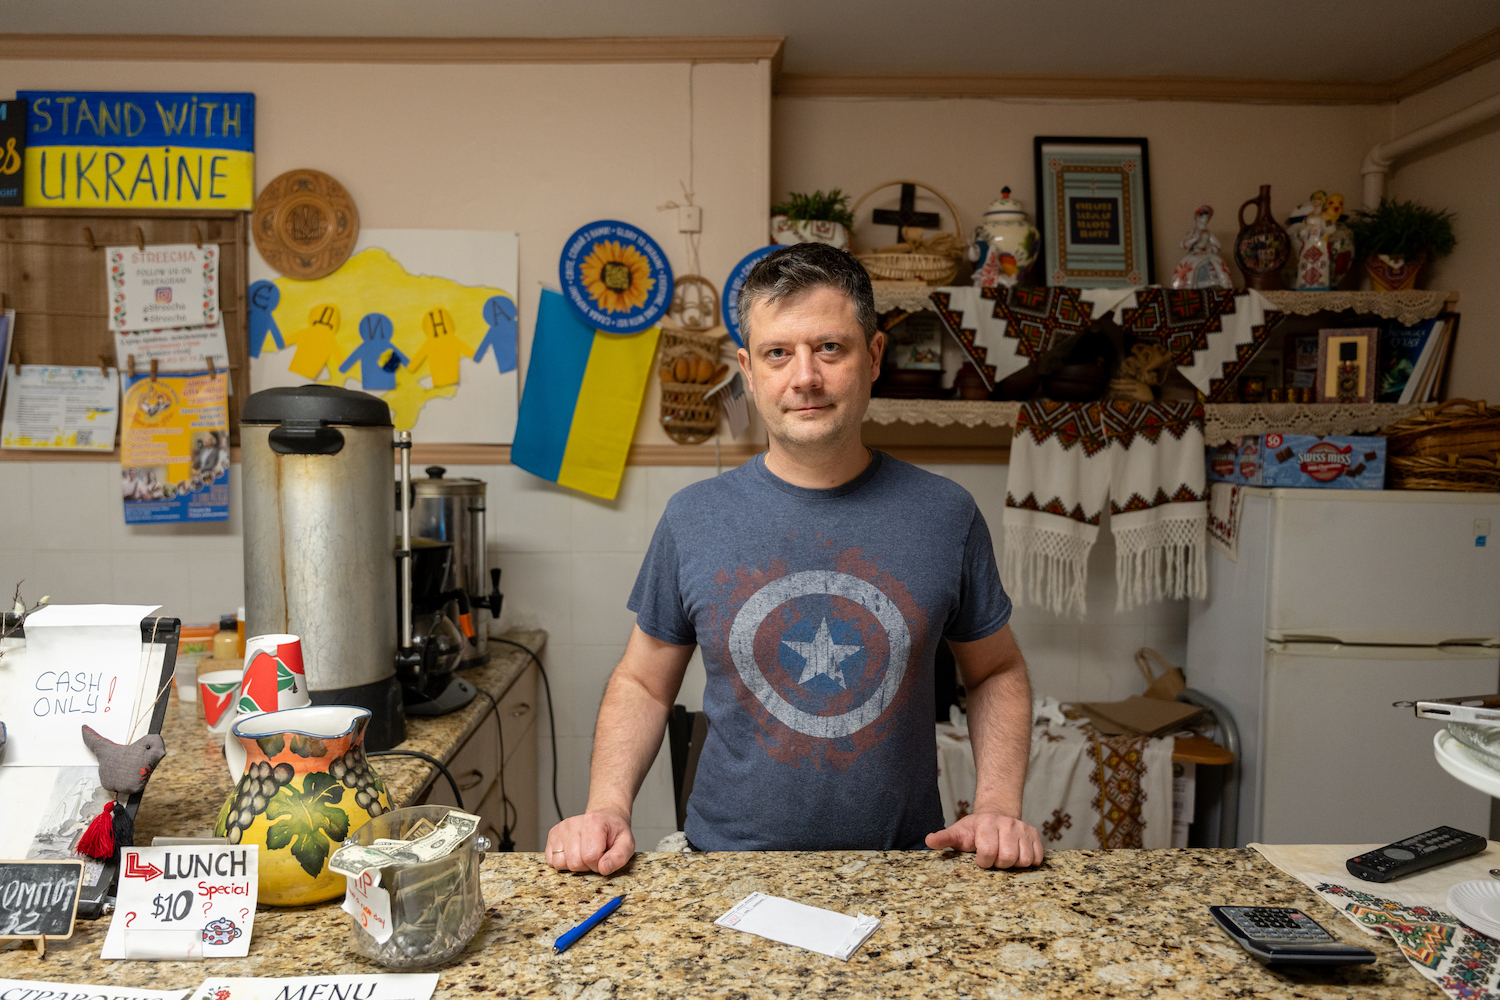 A man wearing a dark blue T-shirt with a Captain America shield image on it stands behind a restaurant counter. Behind him is a wall decorated by Ukrainian flags, fabrics, and pro-Ukrainian signs and flyers.